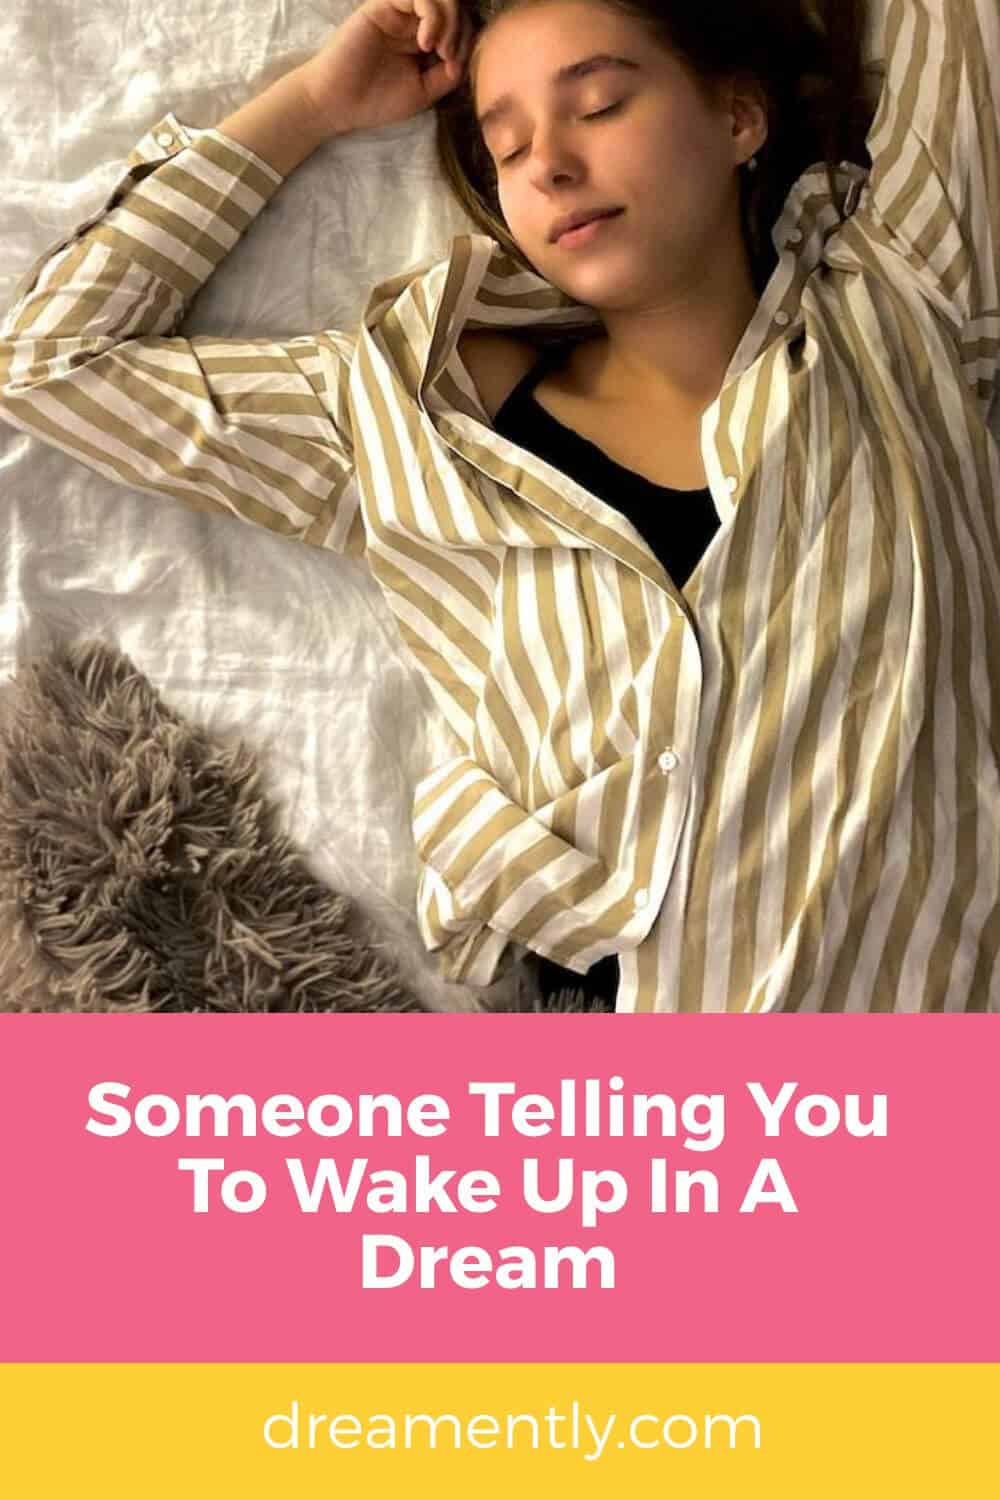 Someone Telling You To Wake Up In A Dream